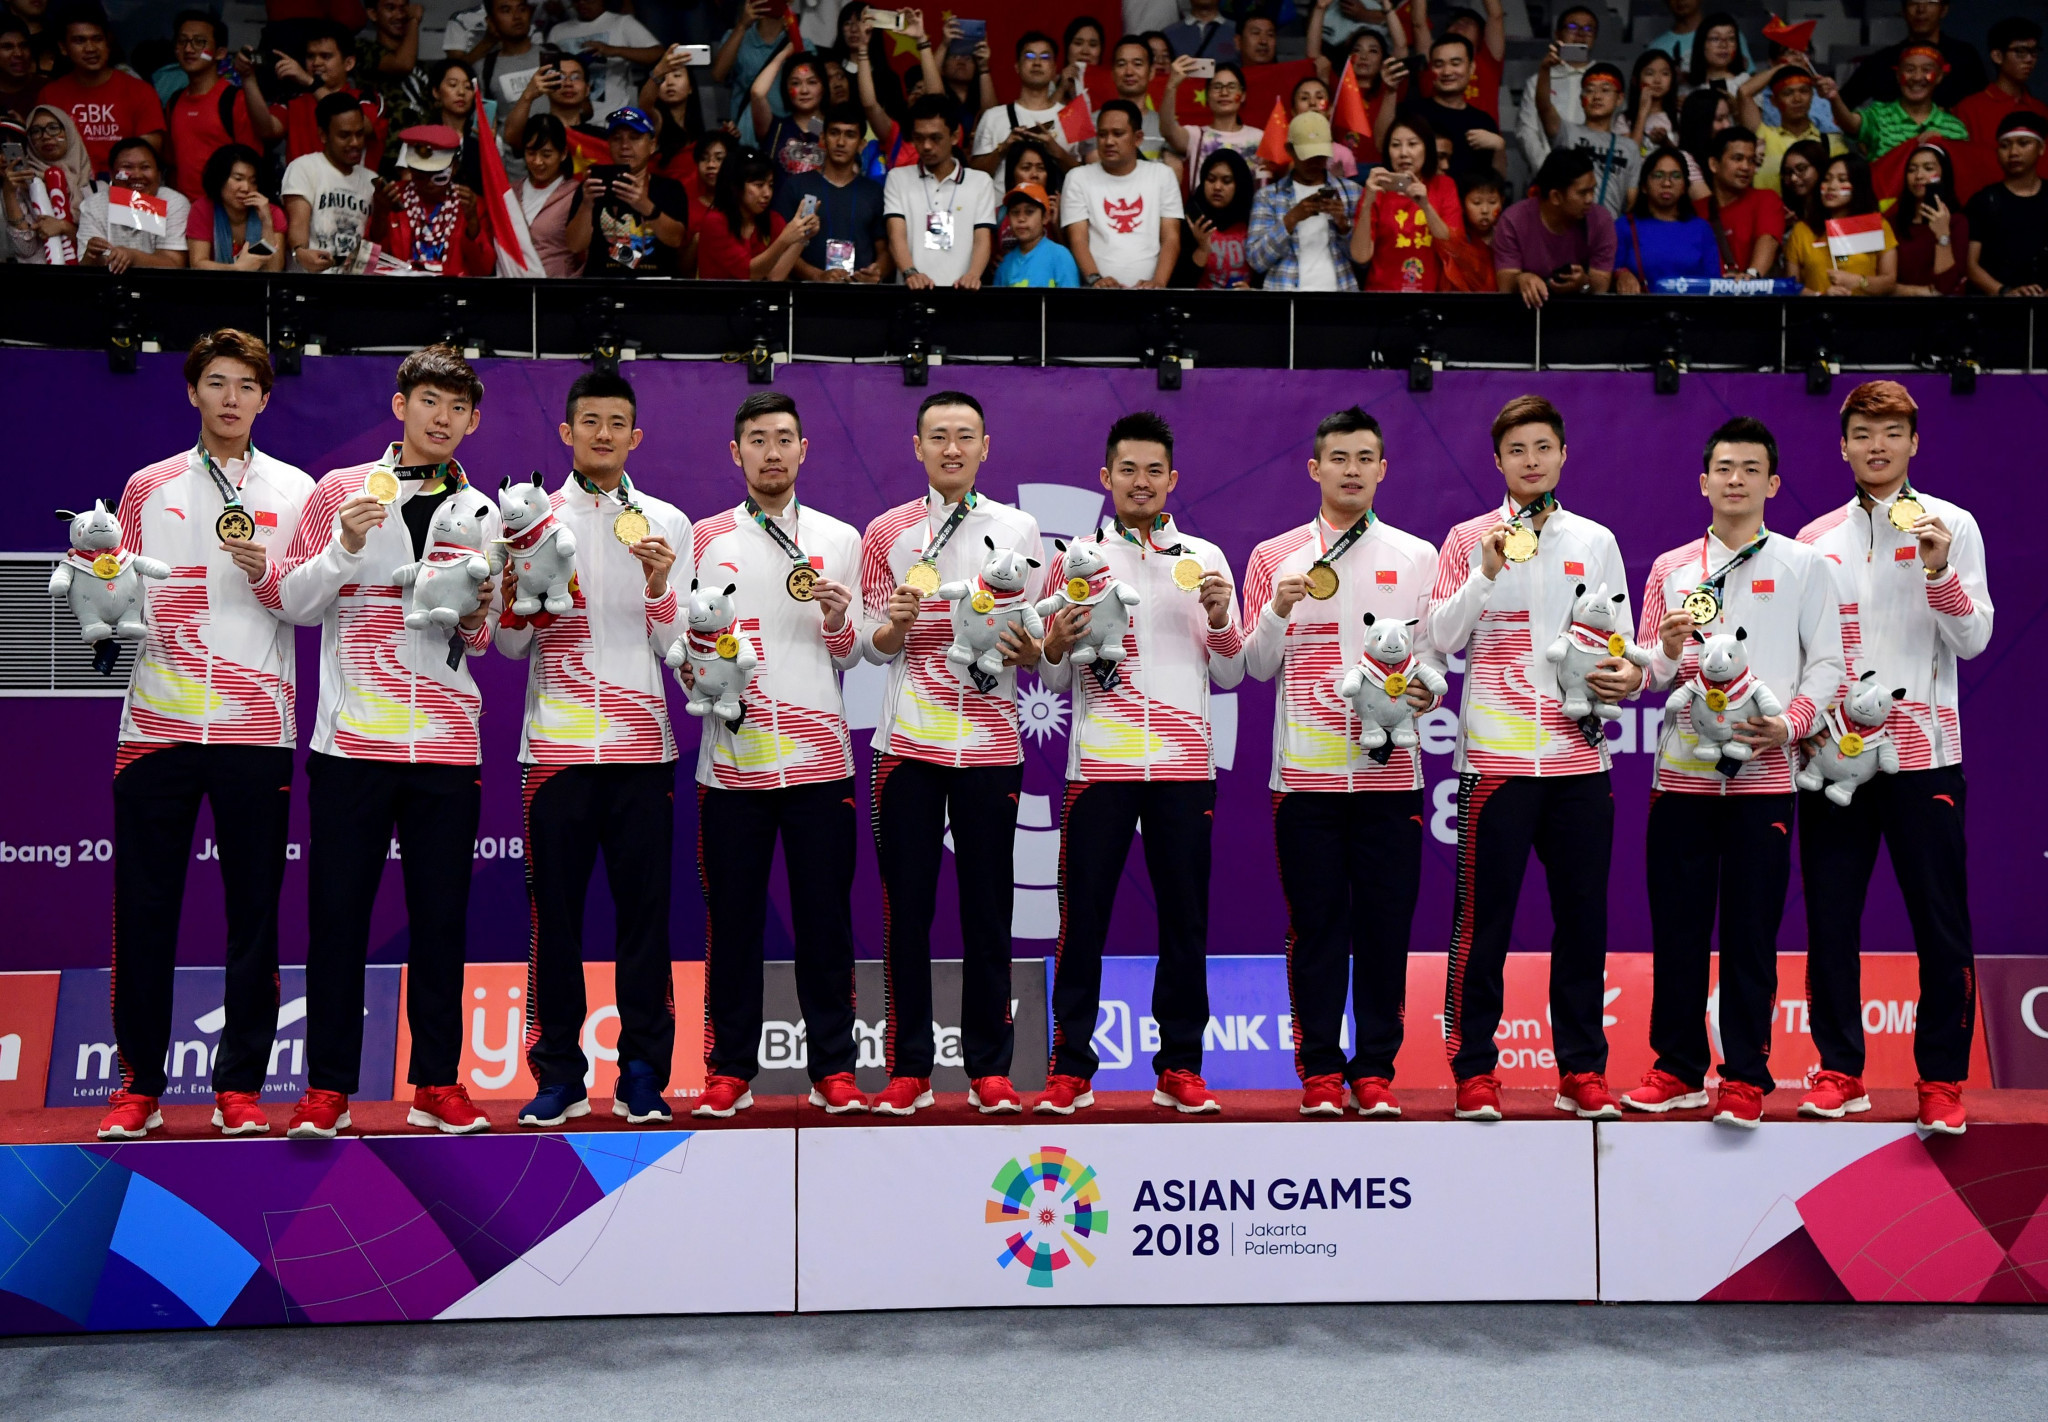 China beat hosts Indonesia in hardfought men's team badminton final at